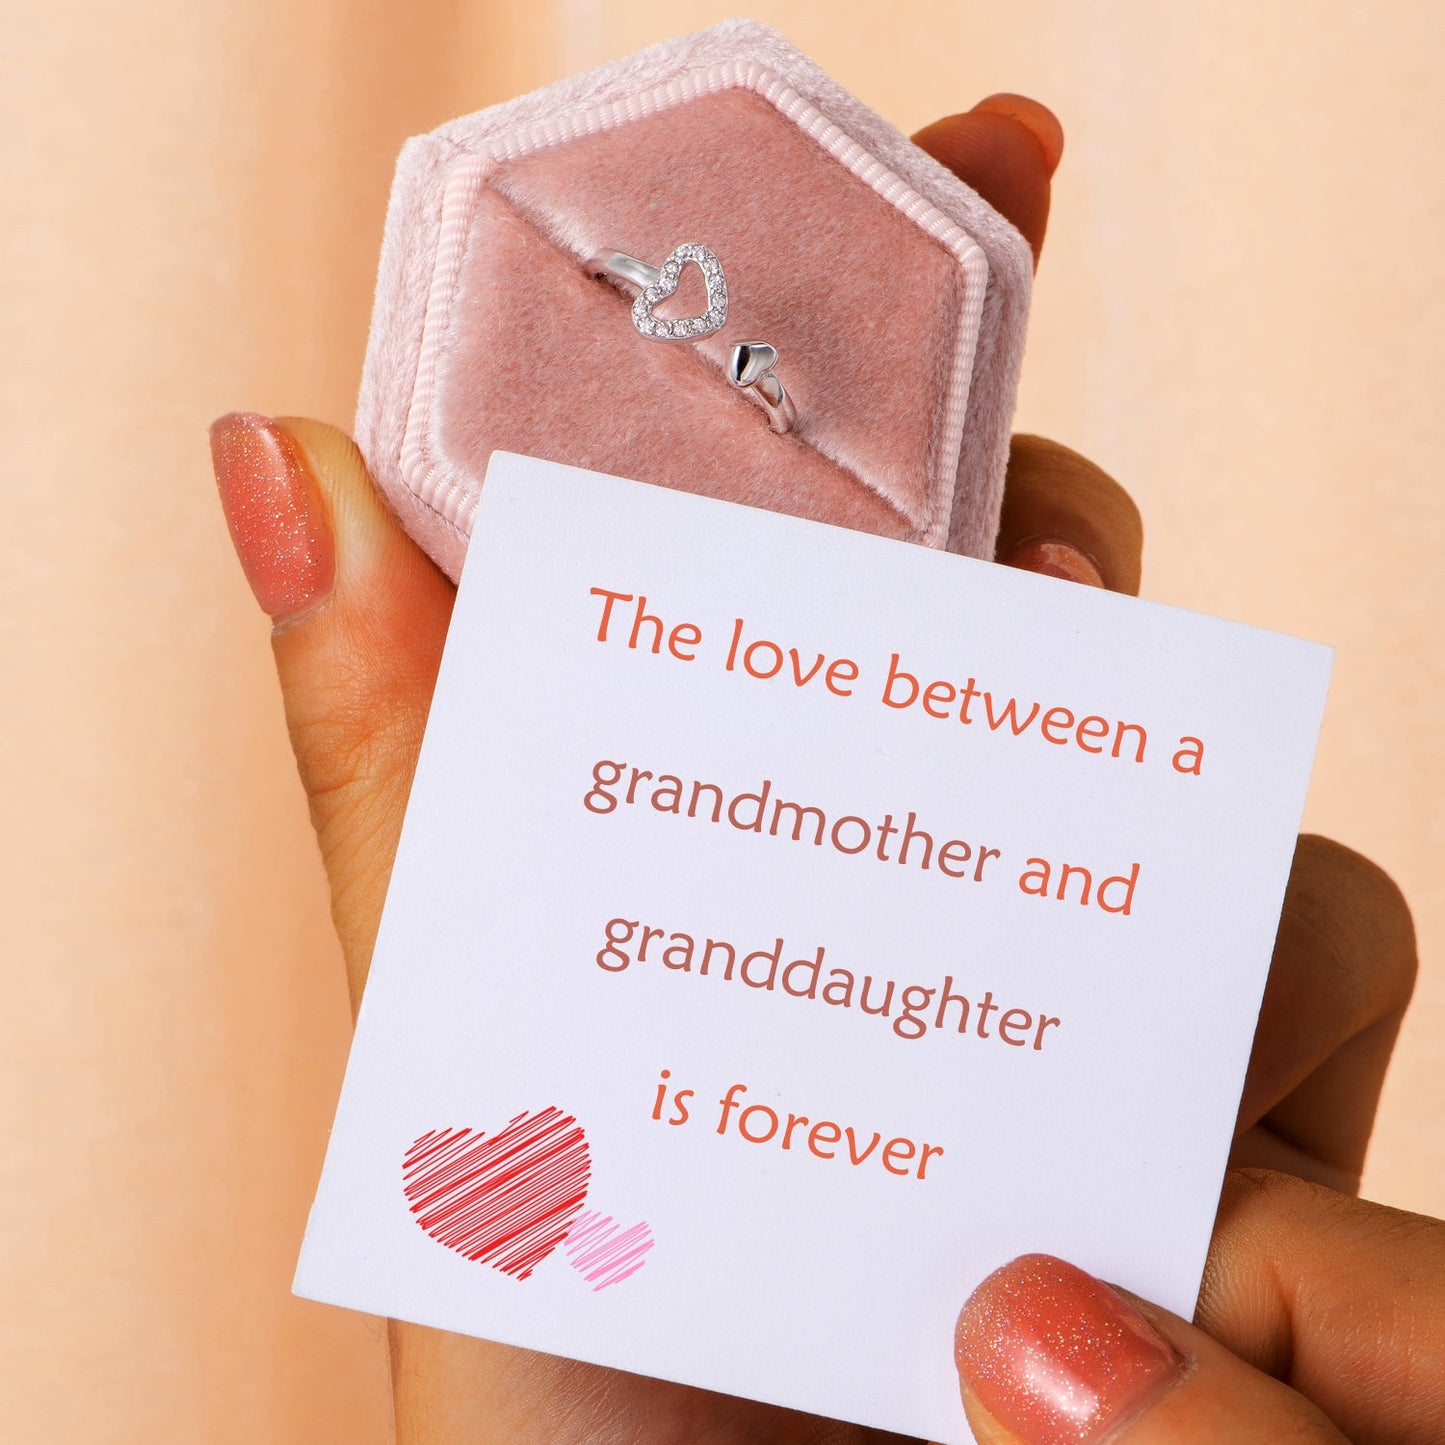 To My Granddaughter "The love between a grandmother and granddaughter is forever" Double Heart Ring and Bracelet